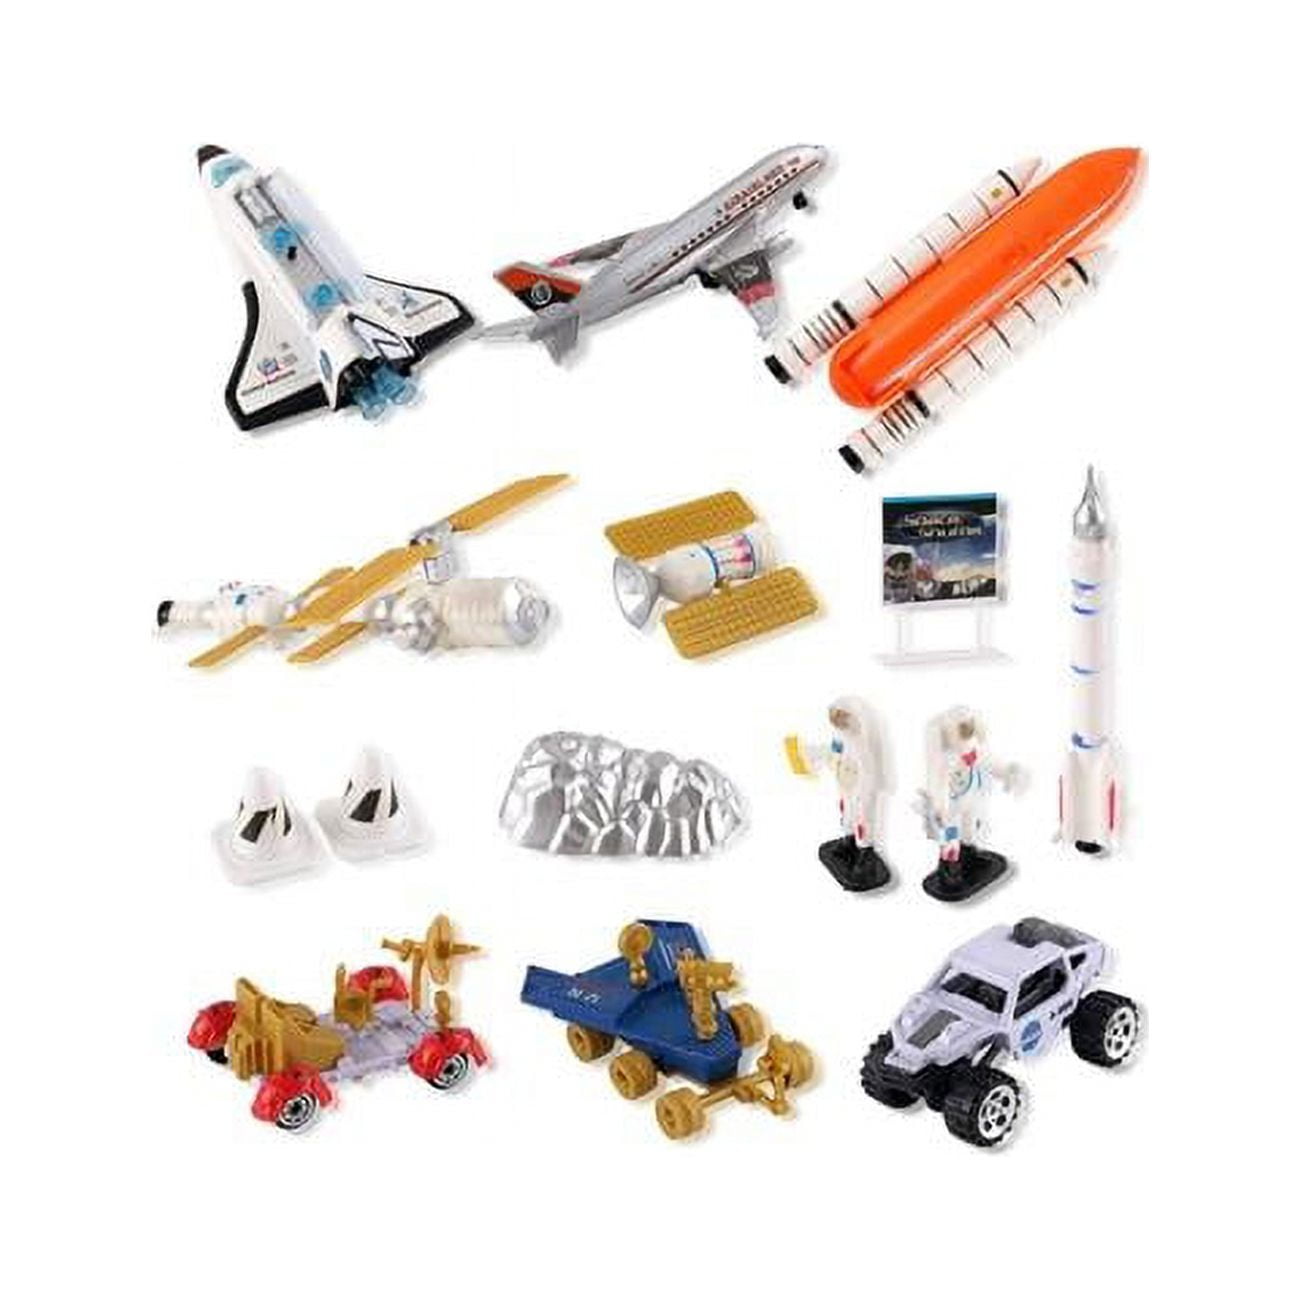 Picture of AZ Trading & Import PS537 Mars Space Shuttle Playset for Kids with Rockets Satellites Rovers & Vehicles - 15 Piece